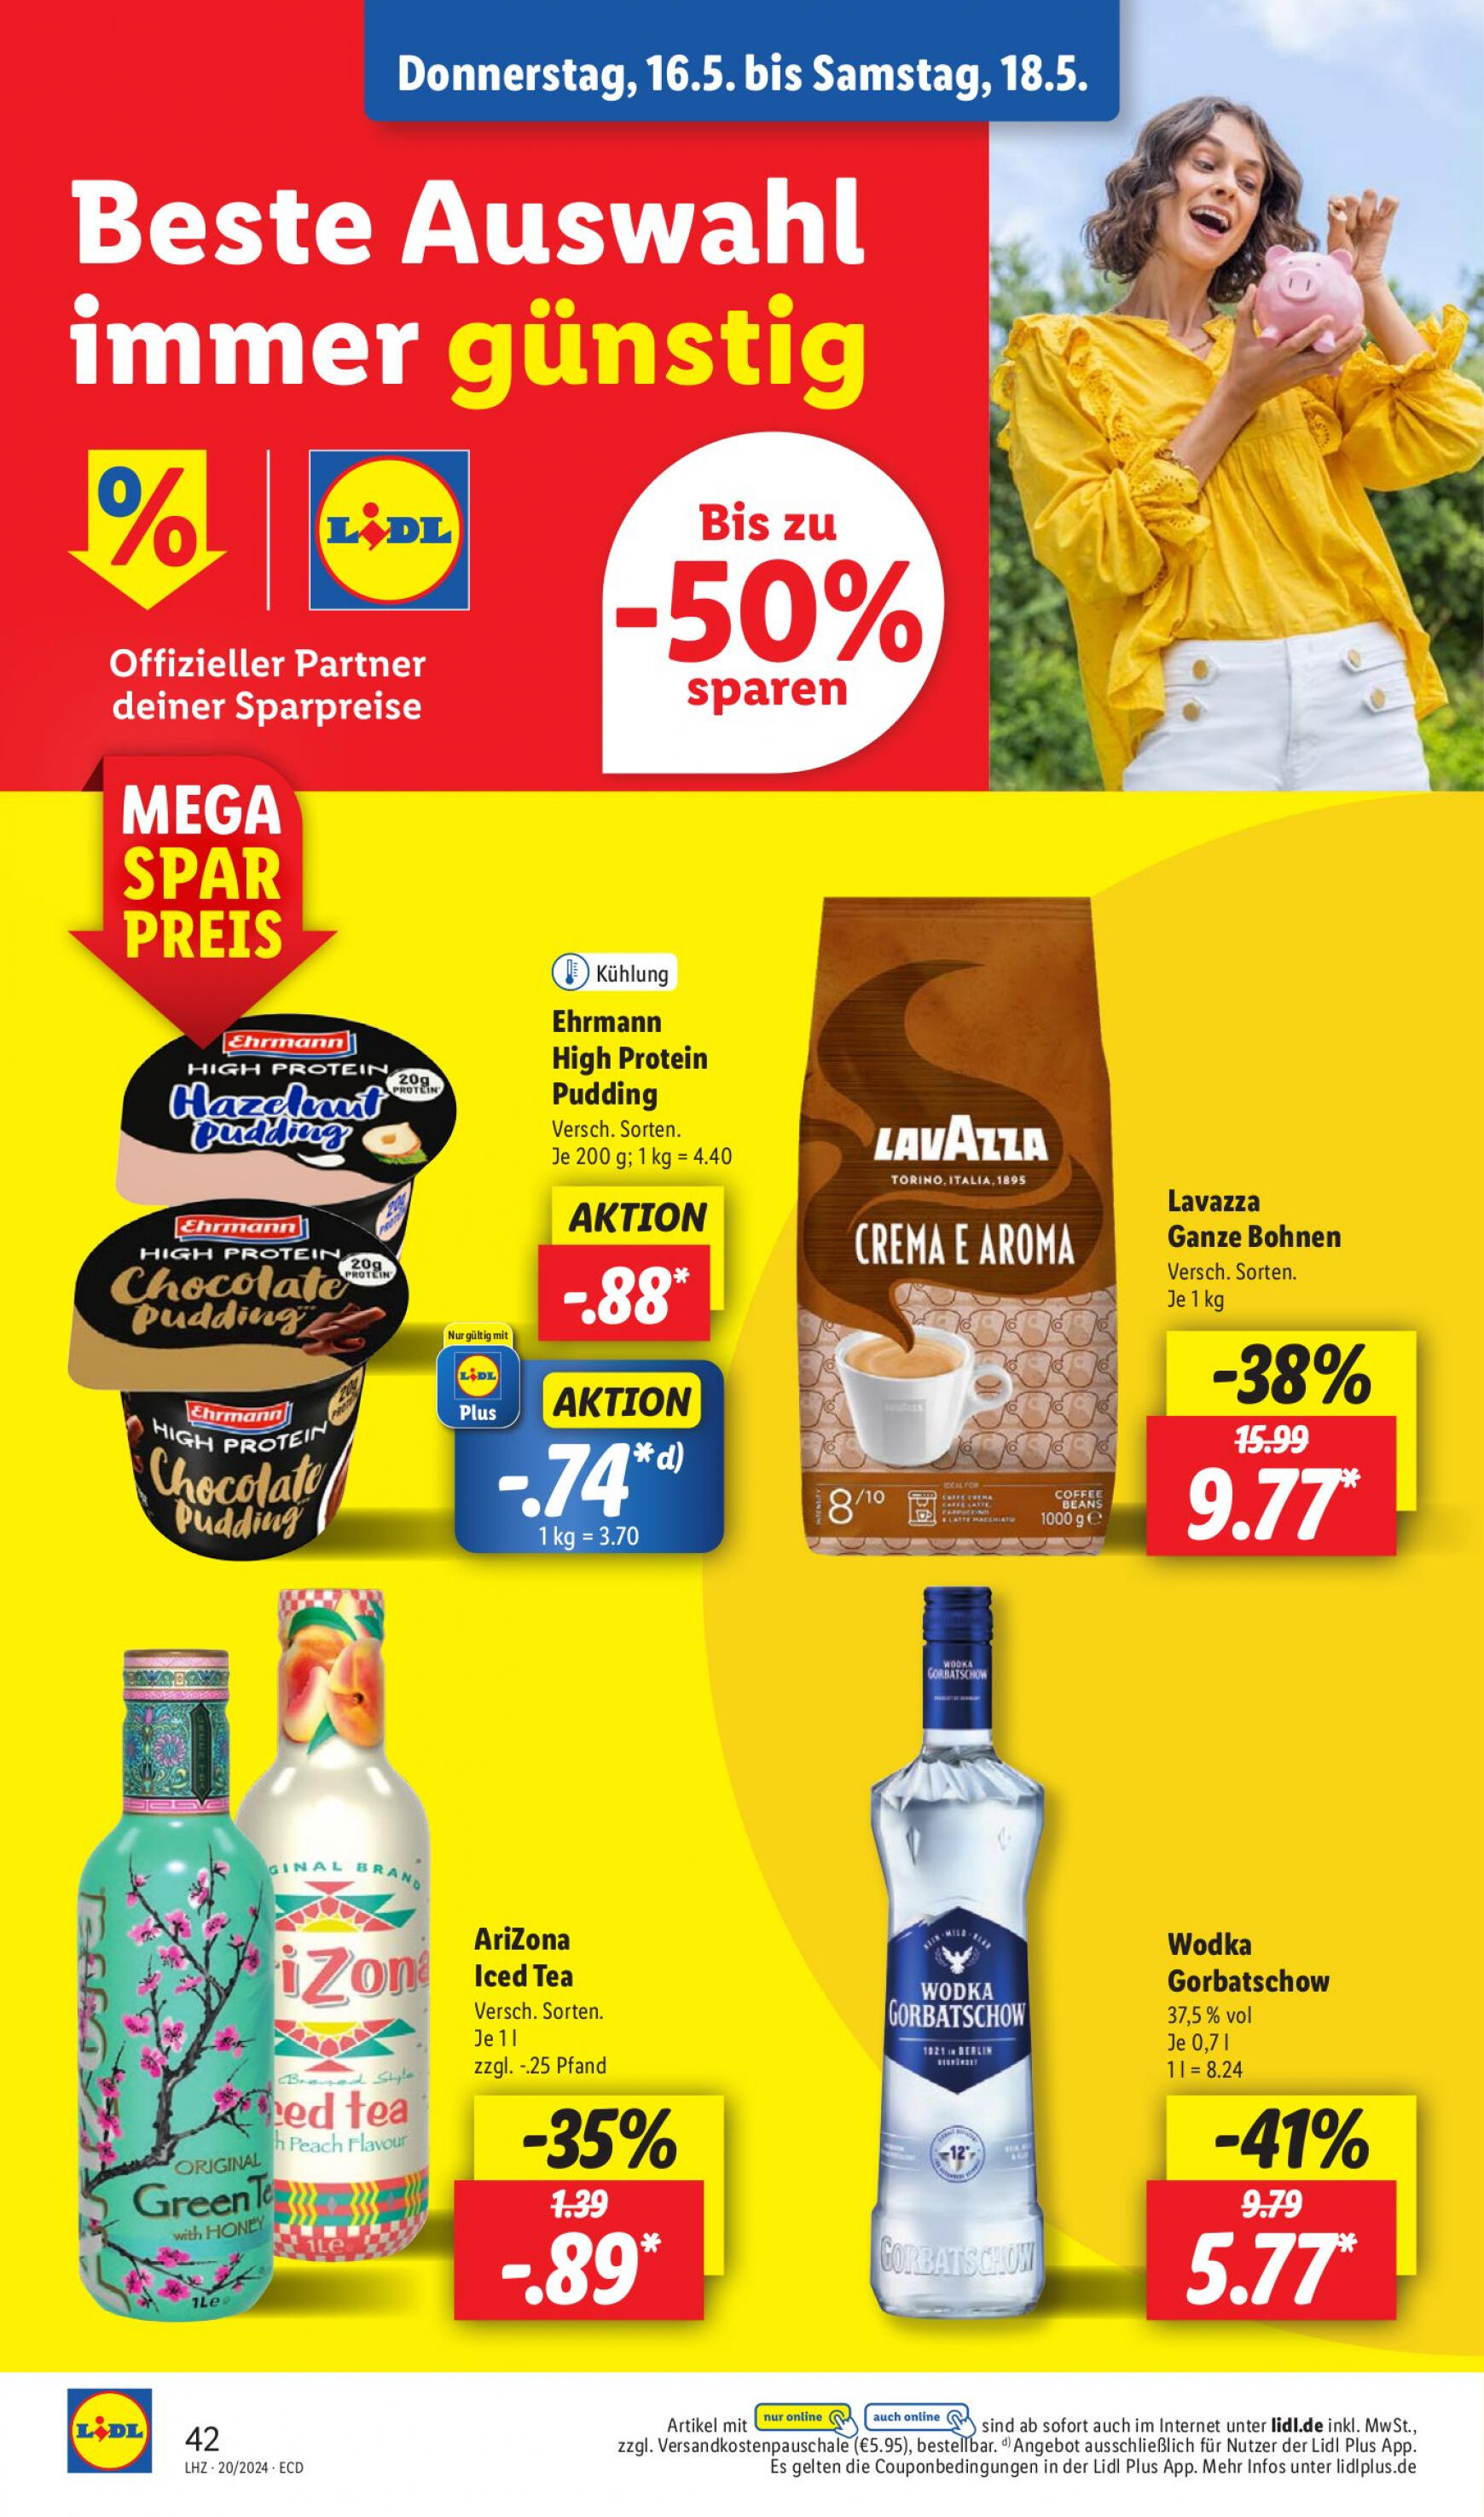 lidl - Flyer Lidl aktuell 13.05. - 18.05. - page: 52